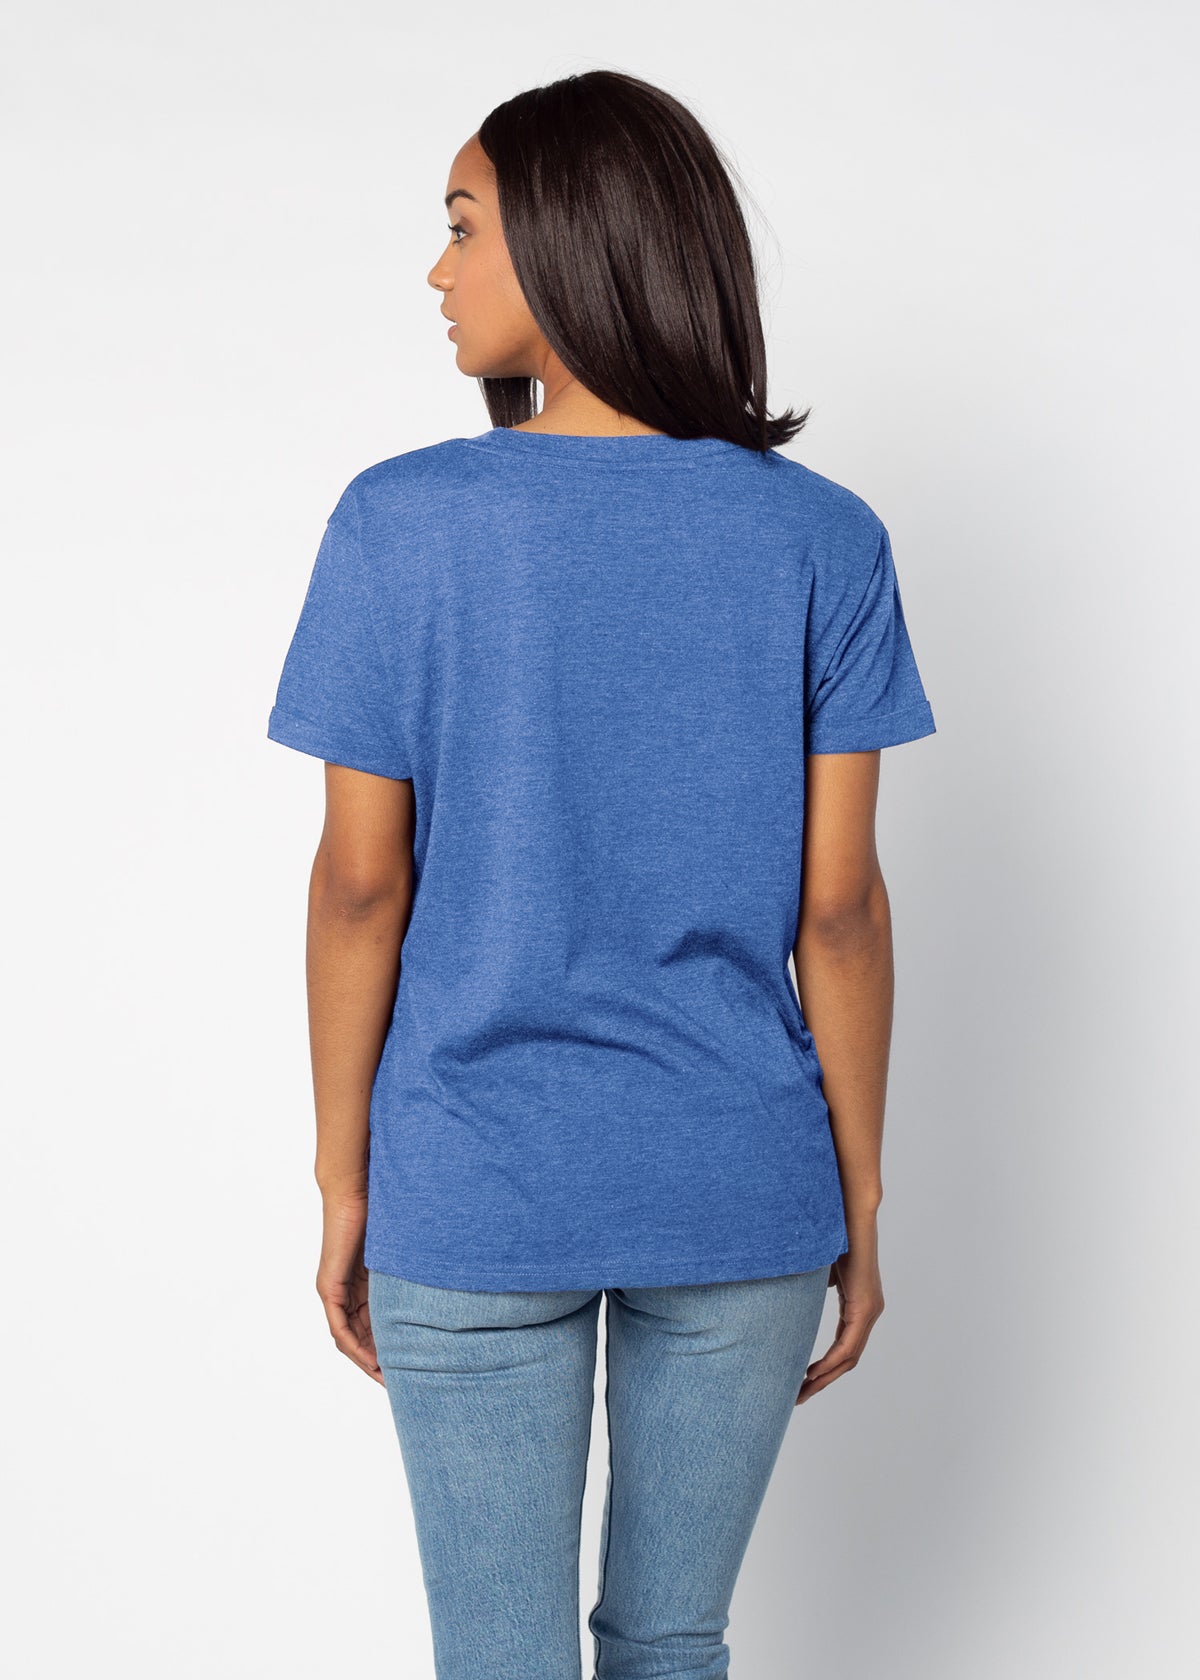 Must Have Tee Kentucky Wildcats in Royal